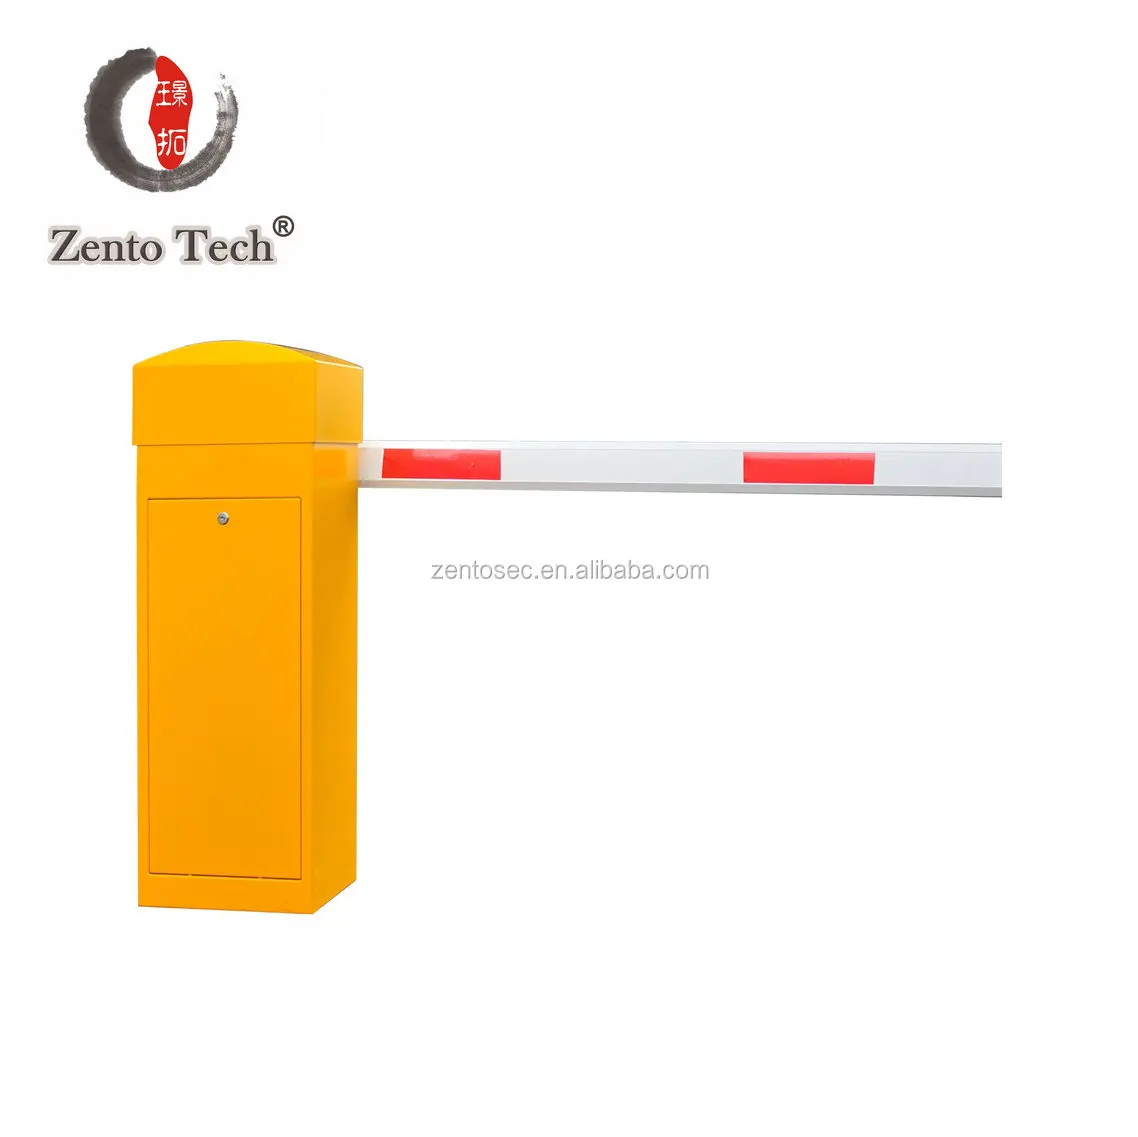 220V AC Heavy Duty Motor for Security Auto Boom Barrier for Smart RFID Parking System